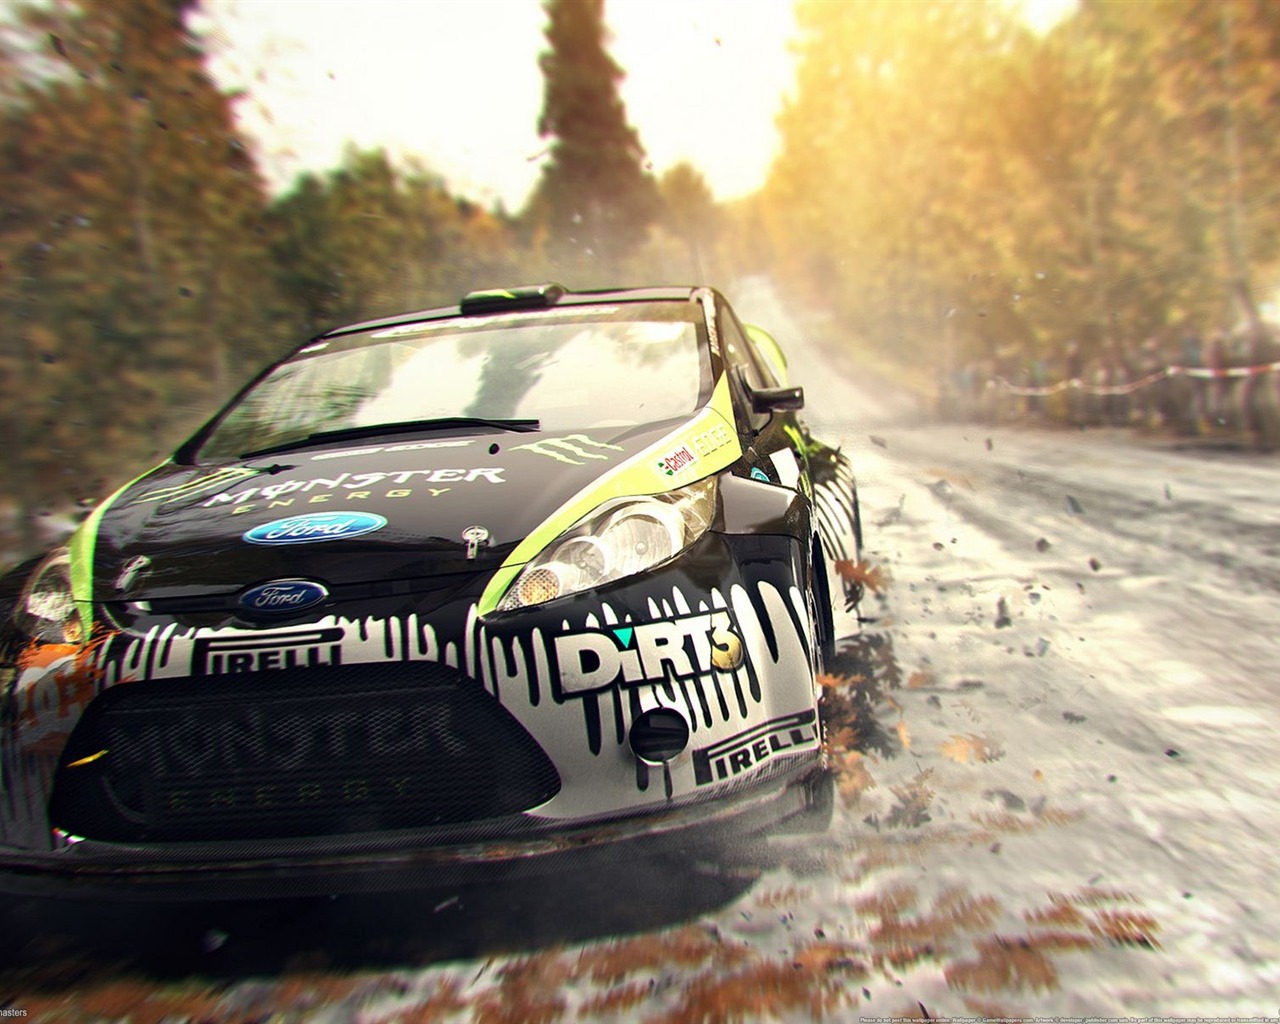 Dirt 3 Hd Wallpapers - Hd Game Wallpapers 1080p For Pc - HD Wallpaper 